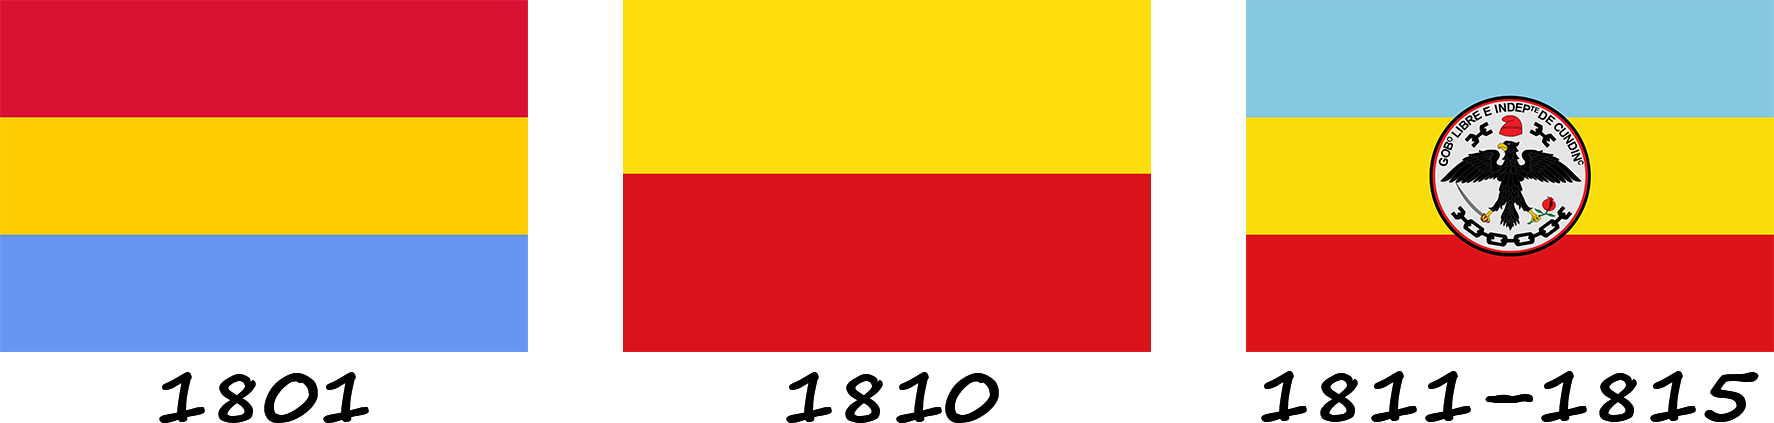 History of the Colombian flag